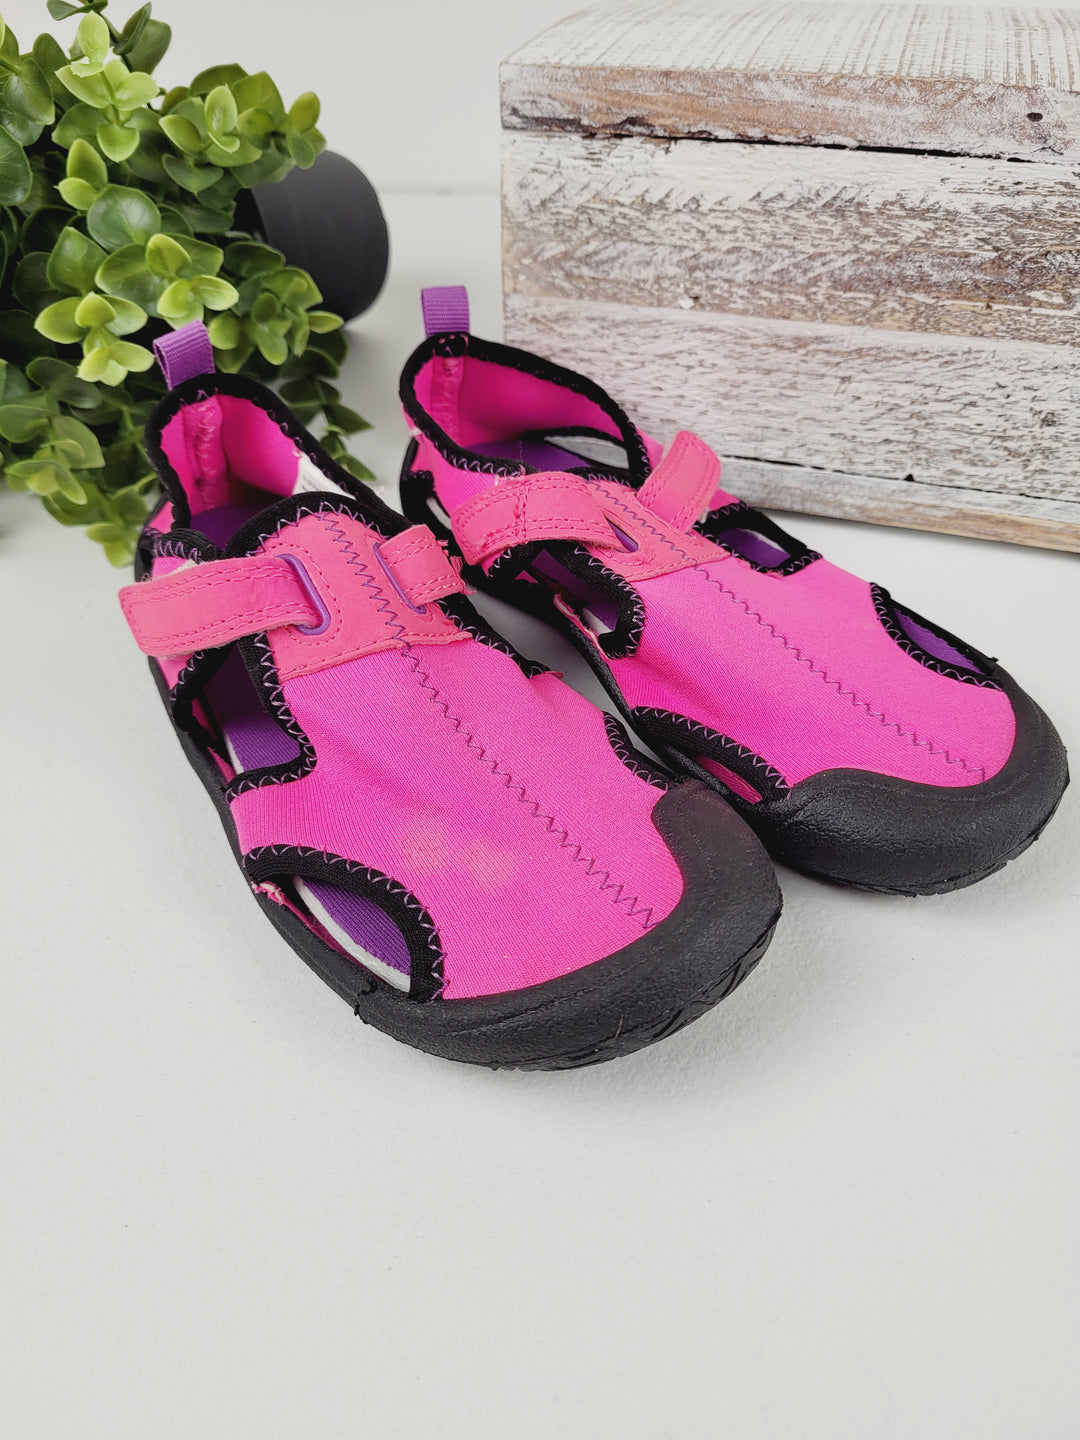 ATHLETIC WORKS PINK WATER SHOES 11/12 VGUC